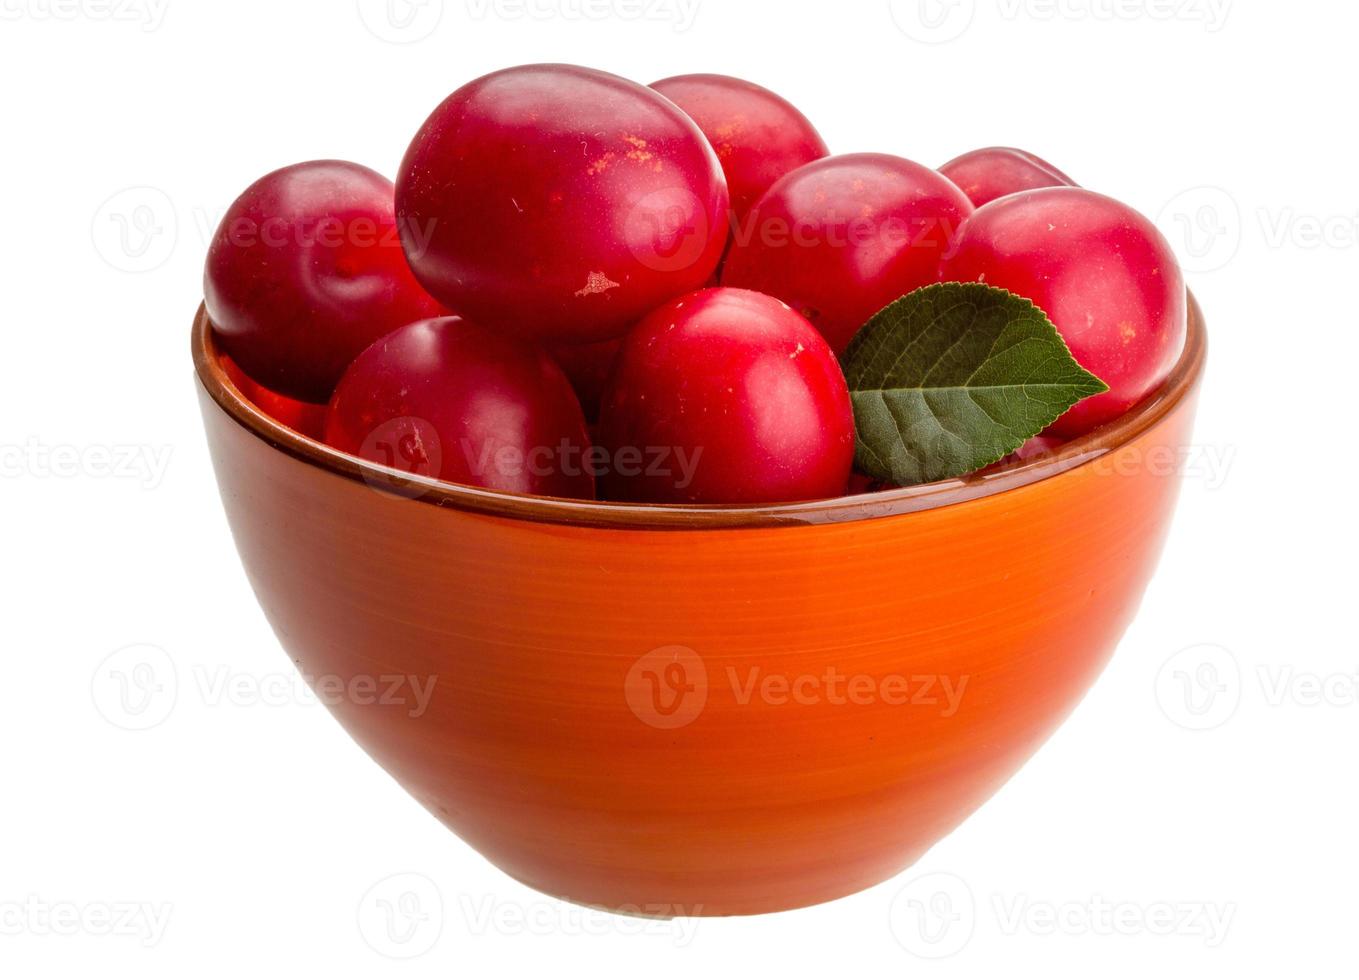 Damson plum in a bowl on white background photo